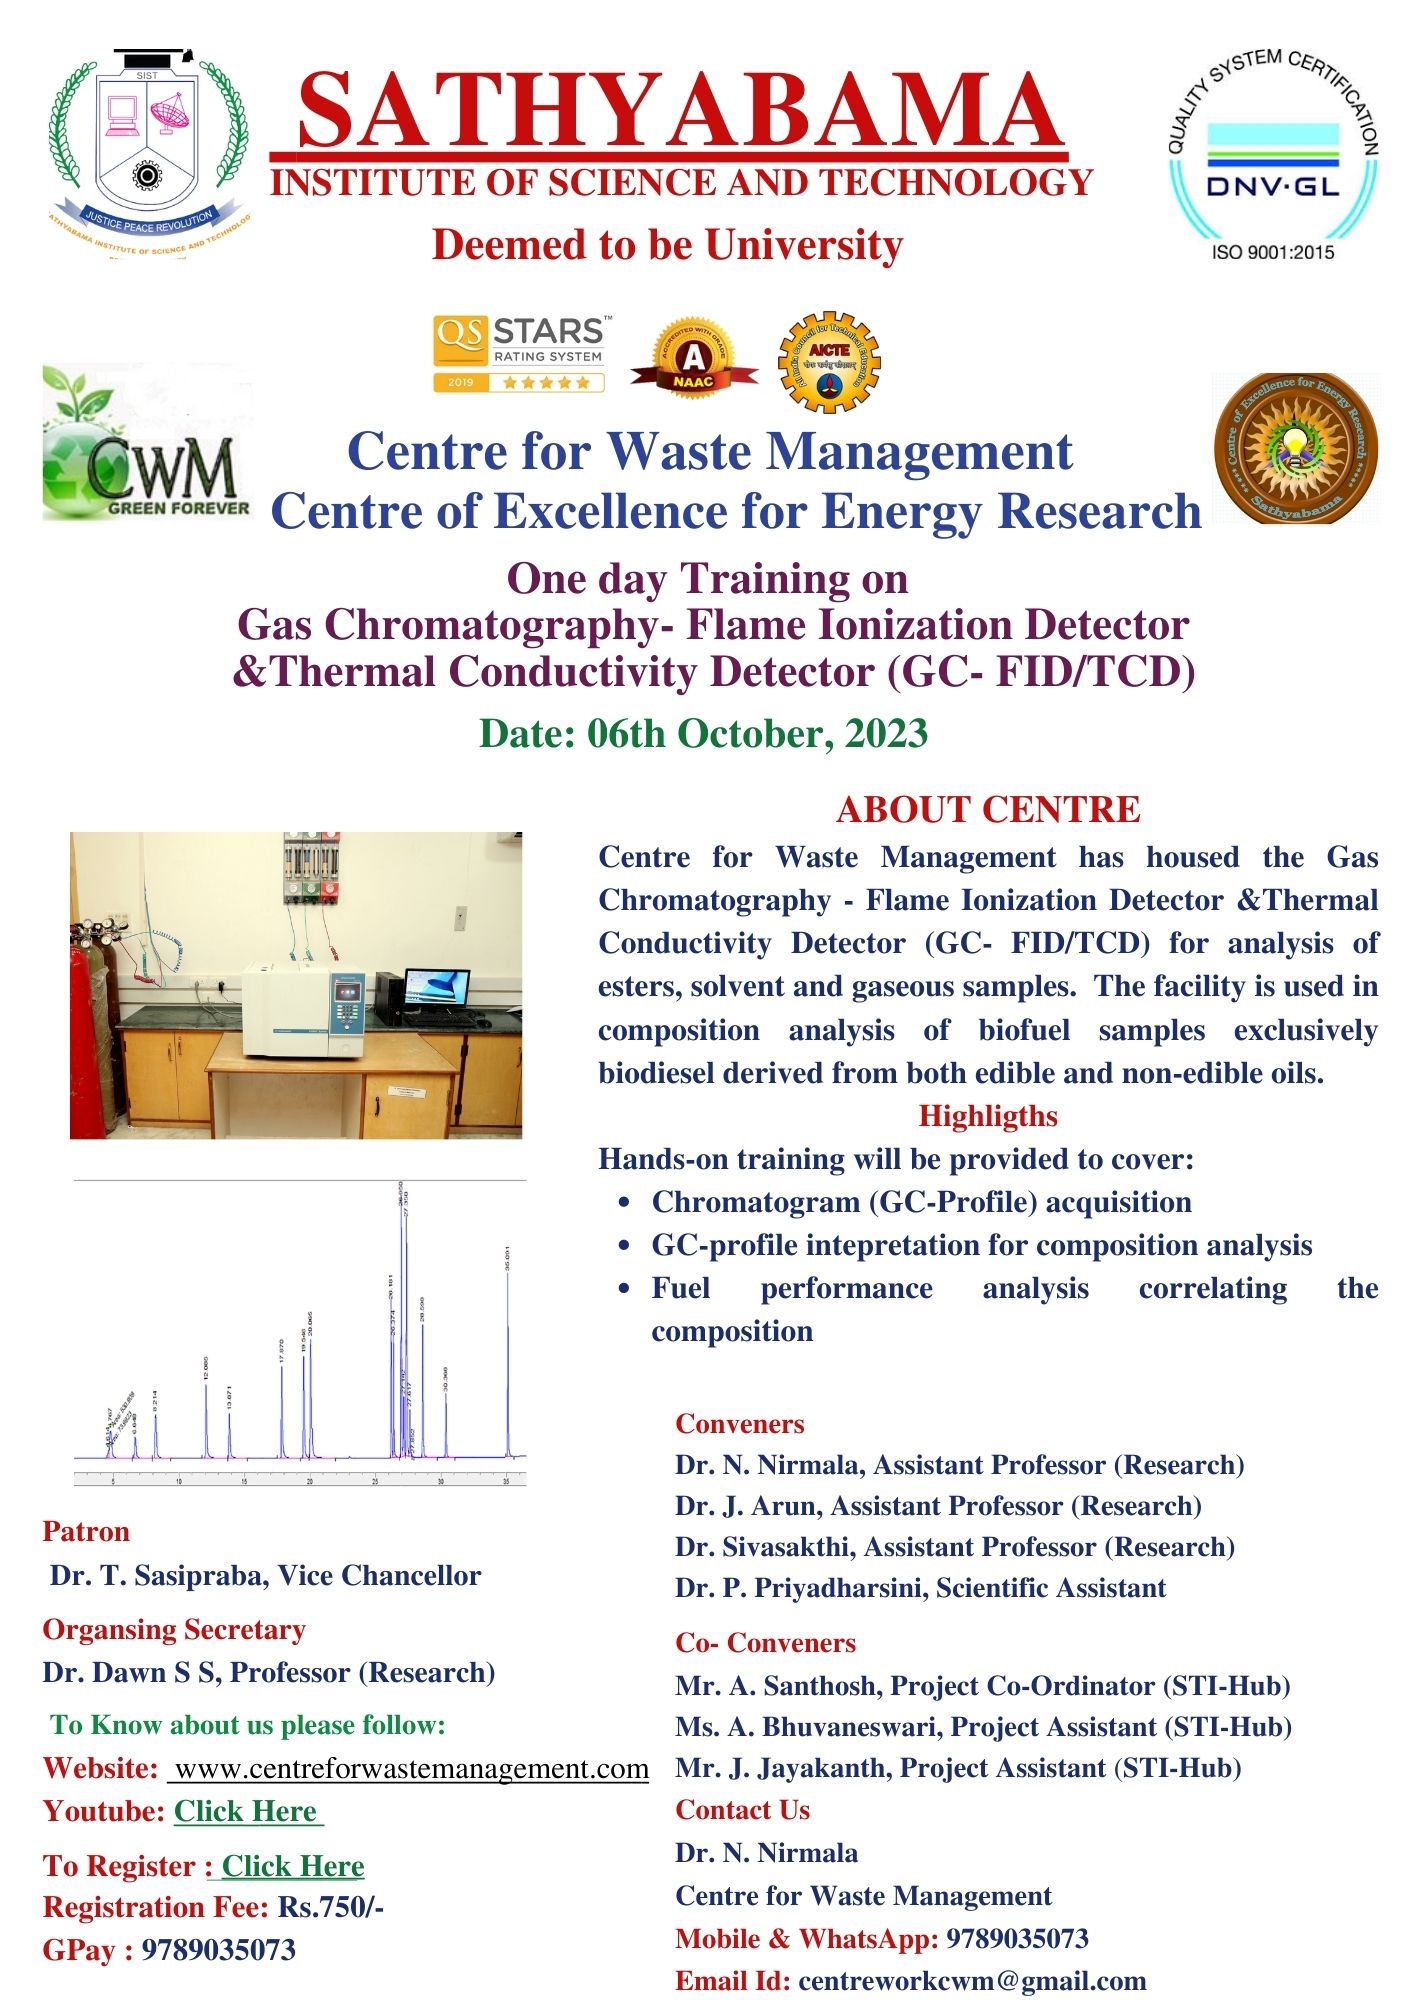 One day Training on Gas Chromatography- Flame Ionization Detector &Thermal Conductivity Detector (GC- FID/TCD) 2023